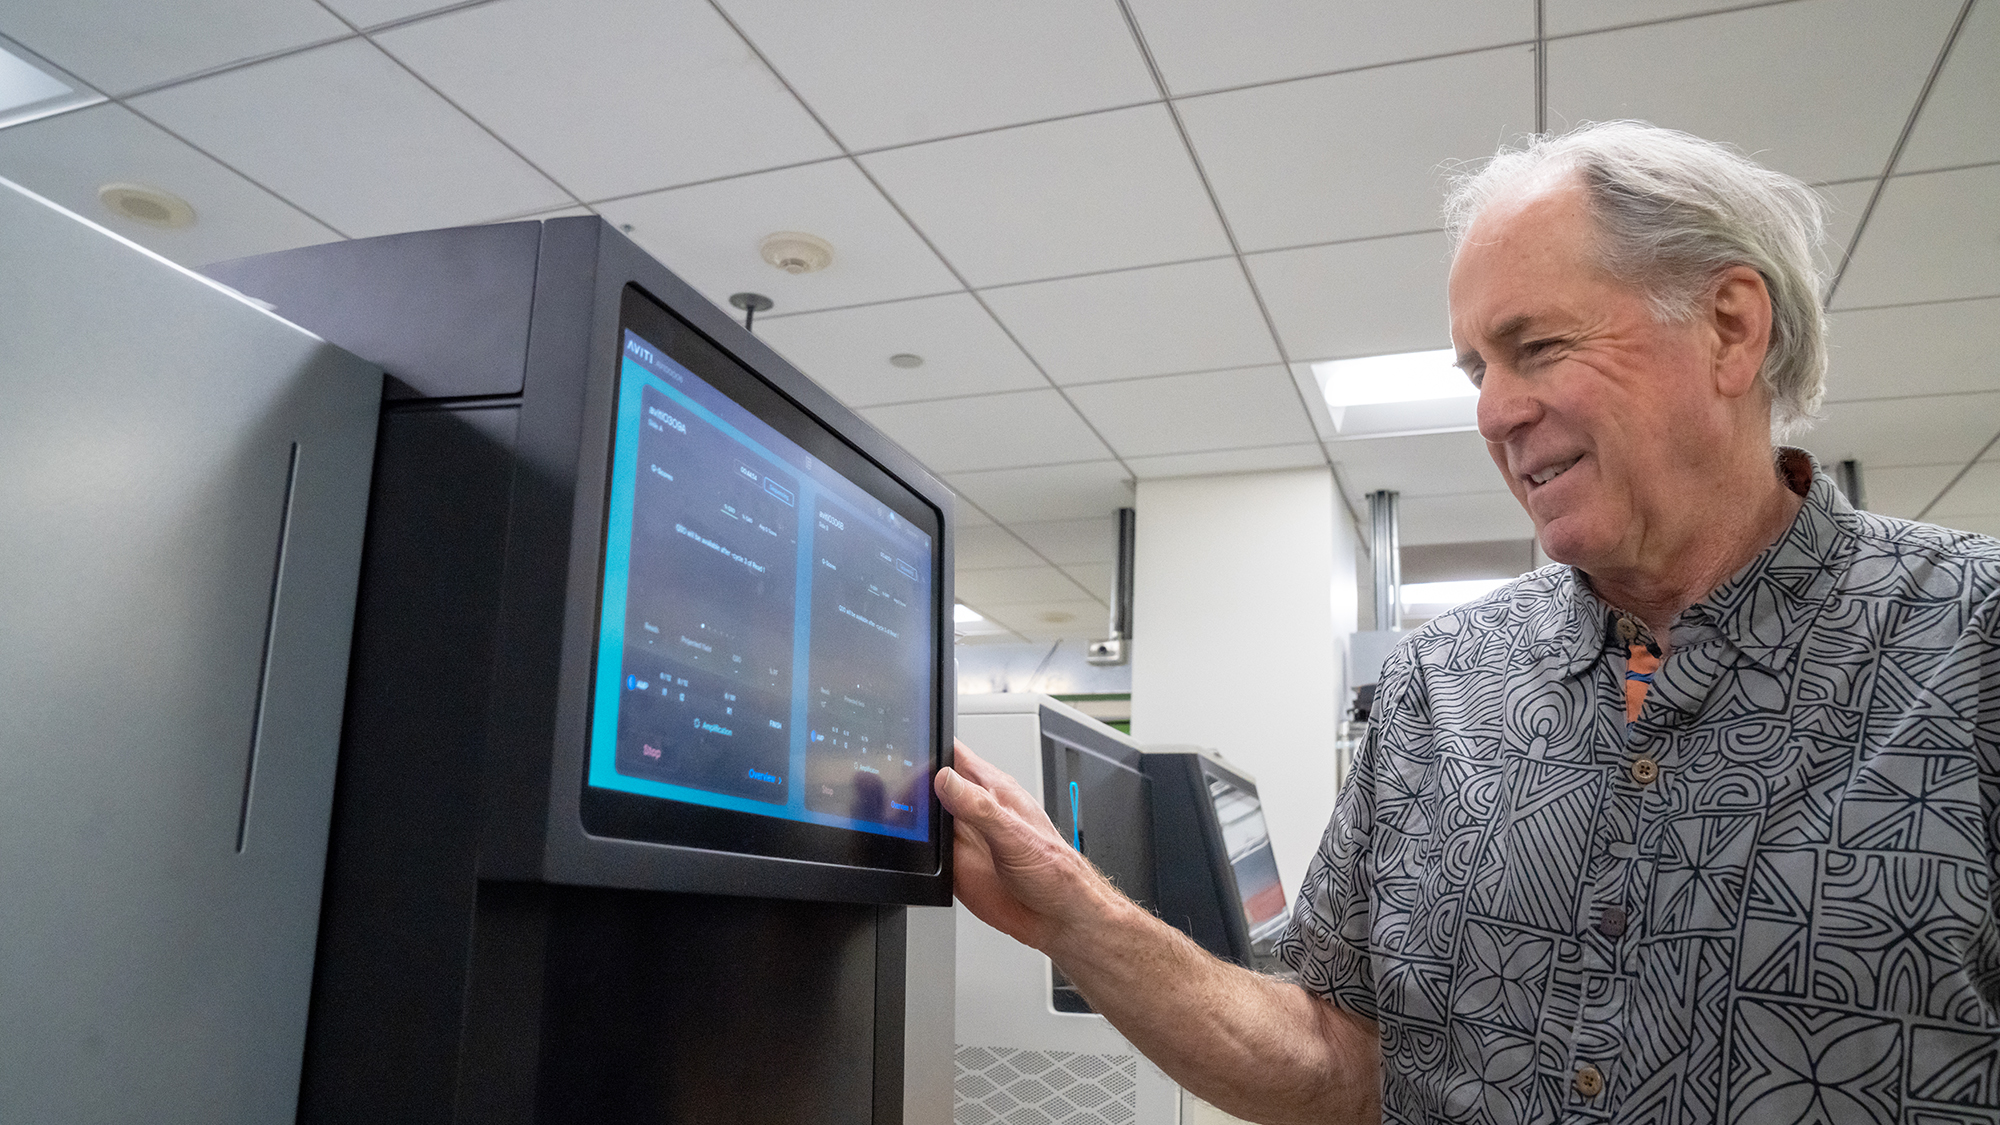 Richard Michelmore stands to the right of a black and blue screen on a genetic sequencing machine, looking at the screen.